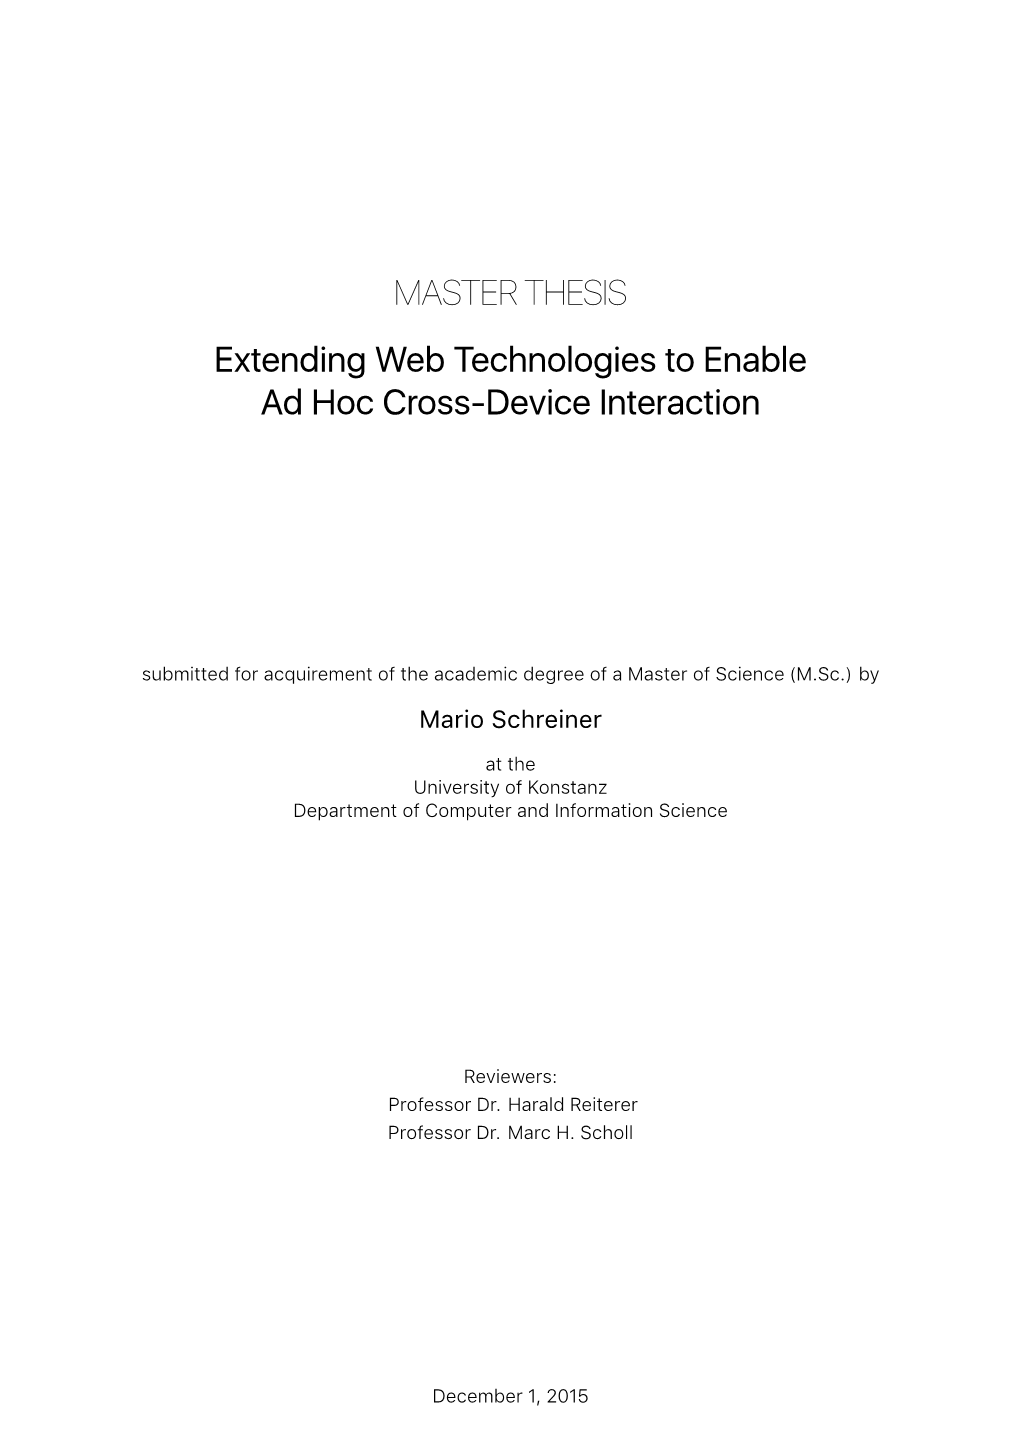 MASTER THESIS Extending Web Technologies to Enable Ad Hoc Cross-Device Interaction